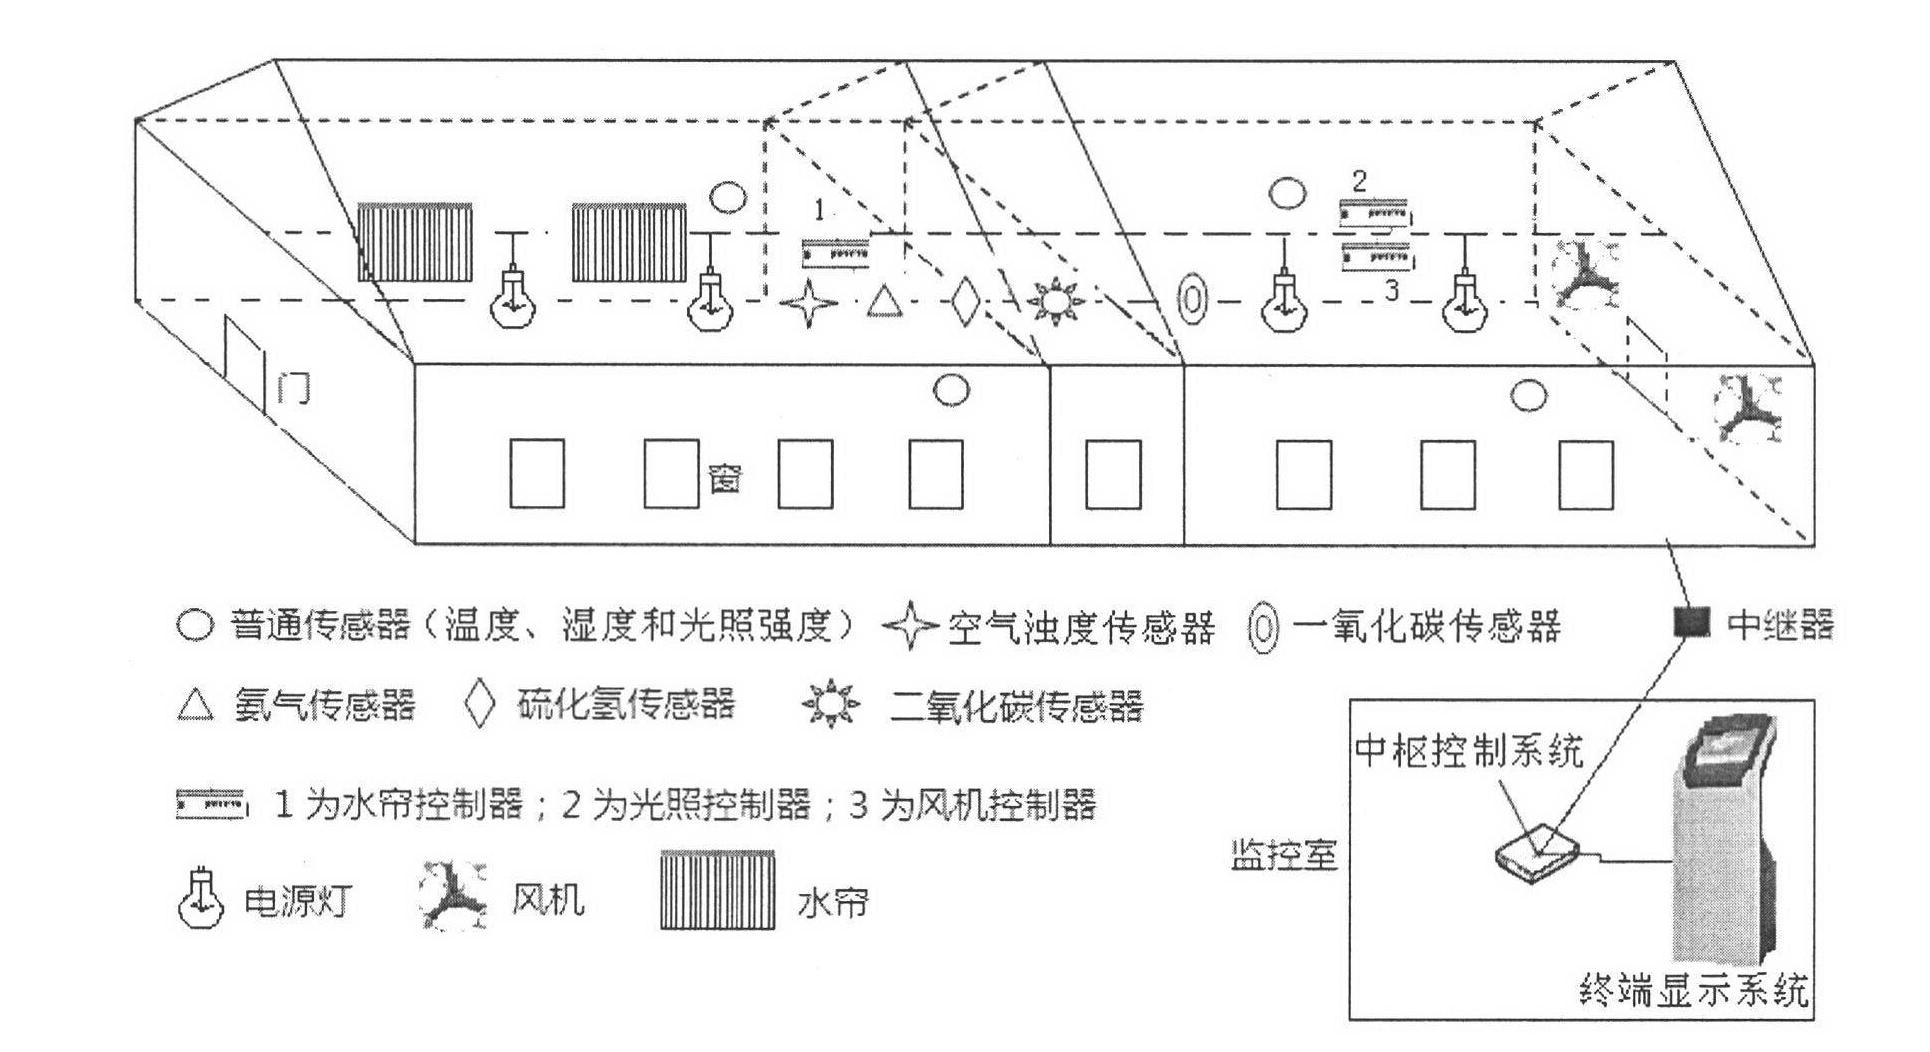 Hen house environment monitoring decision system and application thereof